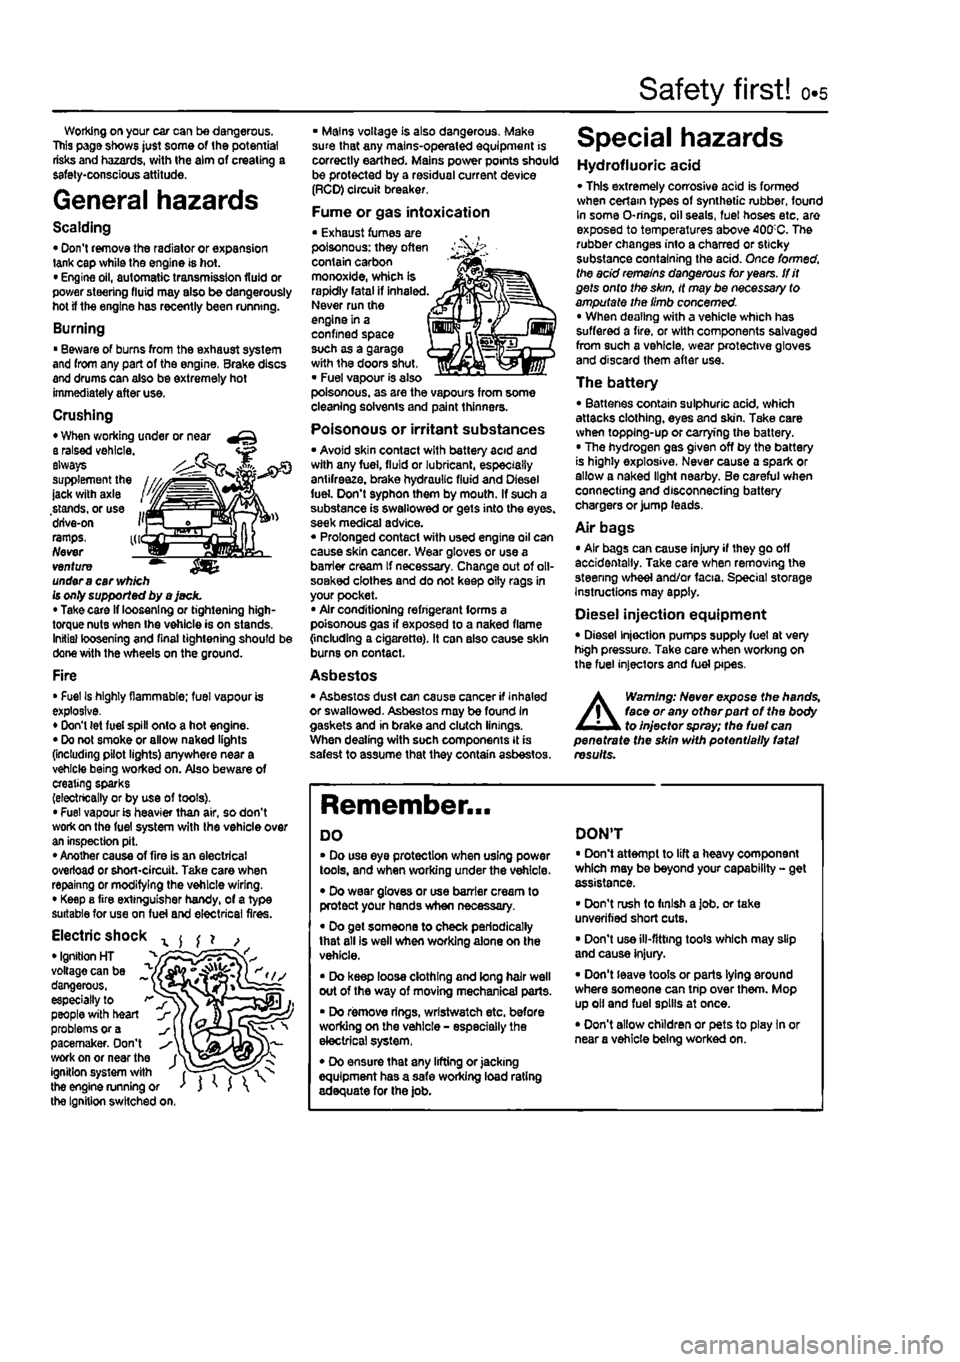 FIAT PUNTO 1998 176 / 1.G Workshop Manual 
Safety first! 0.5 
Working on your ear can be dangerous. This page shows just some of the potential risks and hazards, with the aim of creating a safety-conscious attitude. 
General hazards 
Scalding